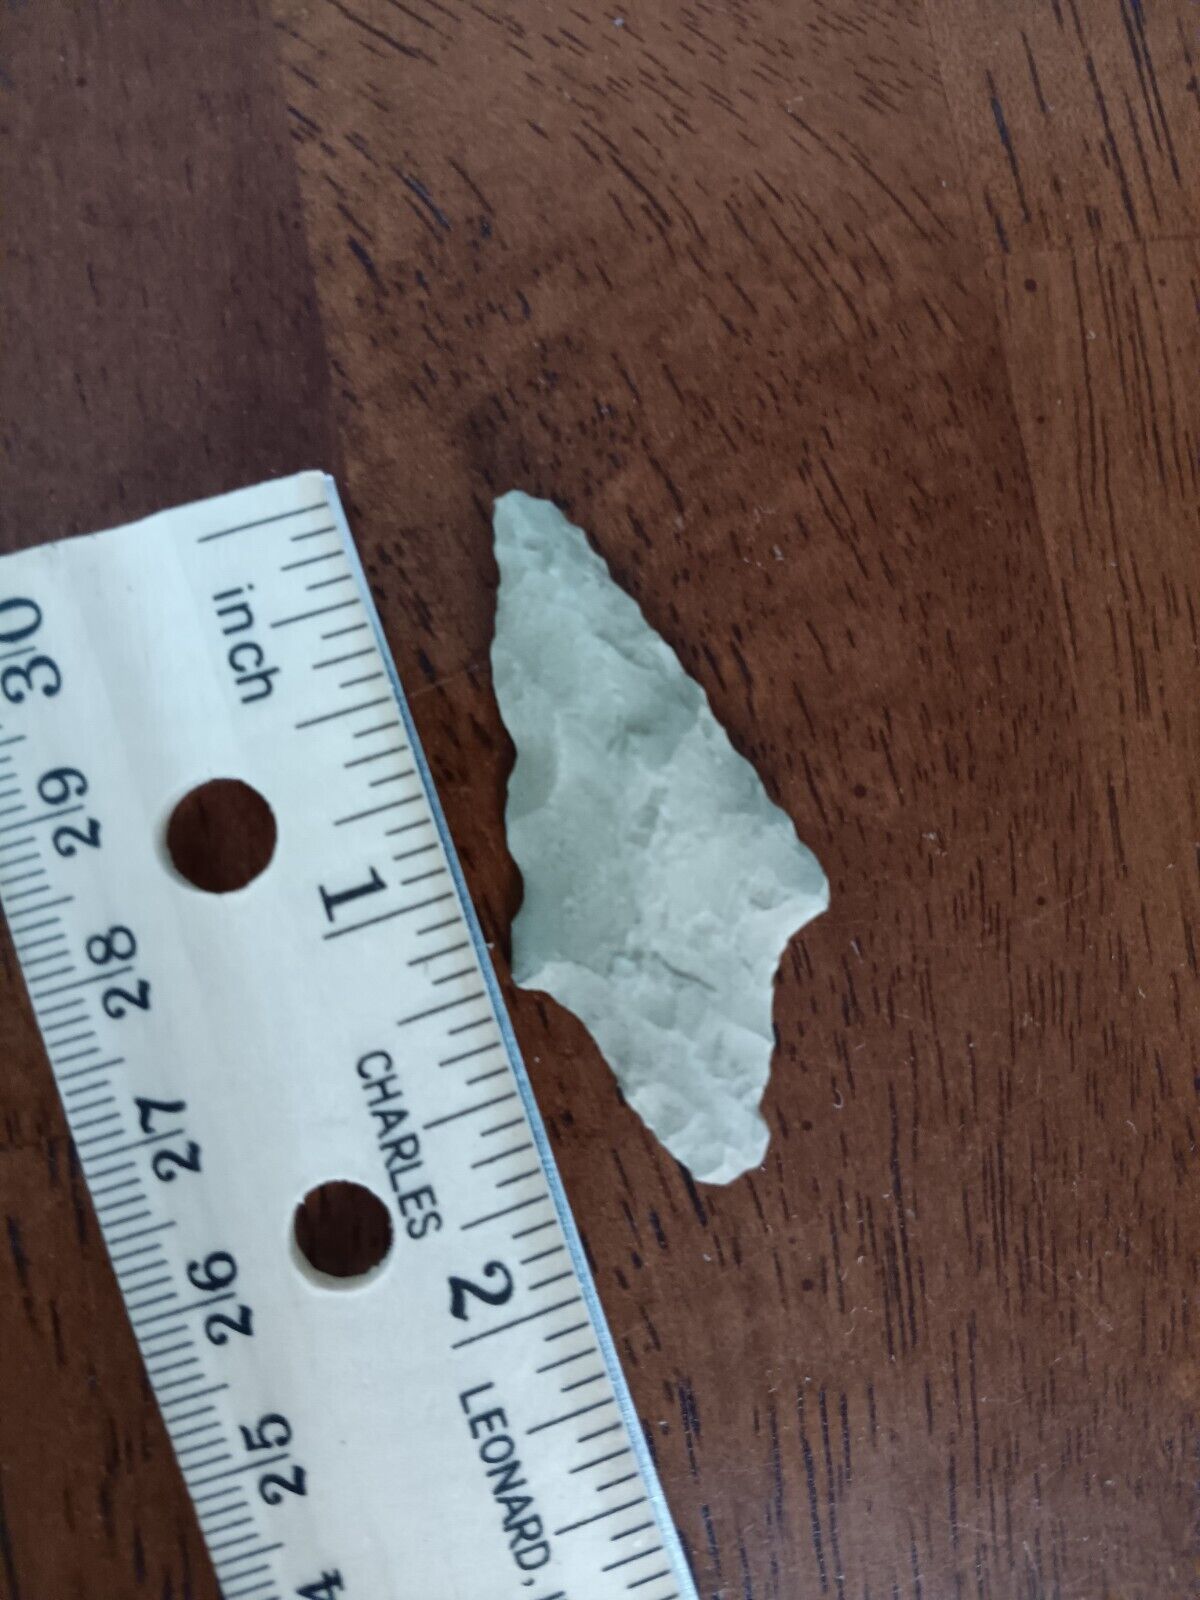 AUTHENTIC NATIVE AMERICAN INDIAN ARTIFACT FOUND, EASTERN N.C.--- ZZZ/38